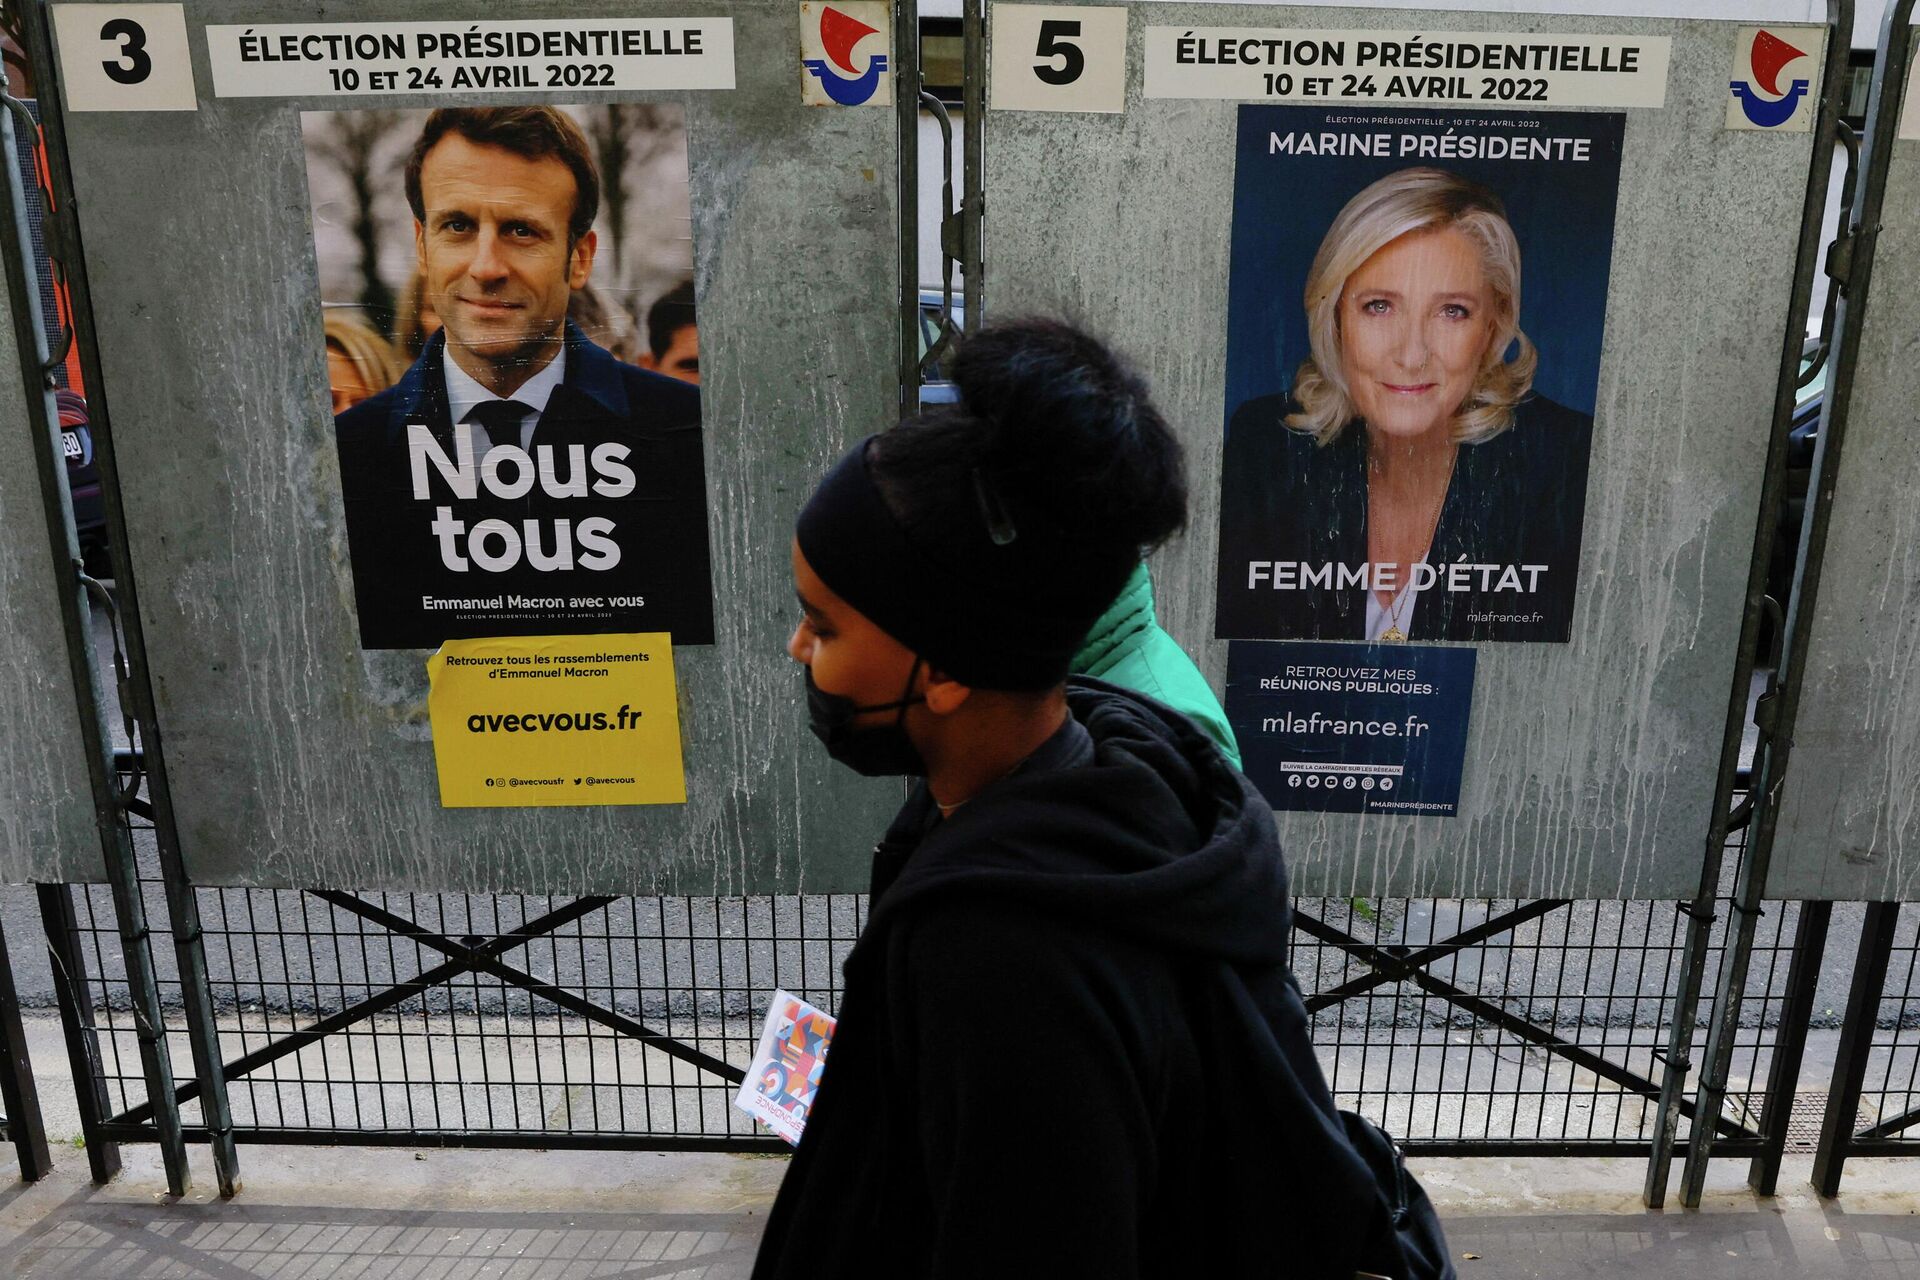 People walk past official campaign posters of French presidential election candidates Marine le Pen, leader of French right-wing National Rally (Rassemblement National) party, and French President Emmanuel Macron, candidate for his re-election, displayed on bulletin boards in Paris, France,  - Sputnik International, 1920, 19.04.2022